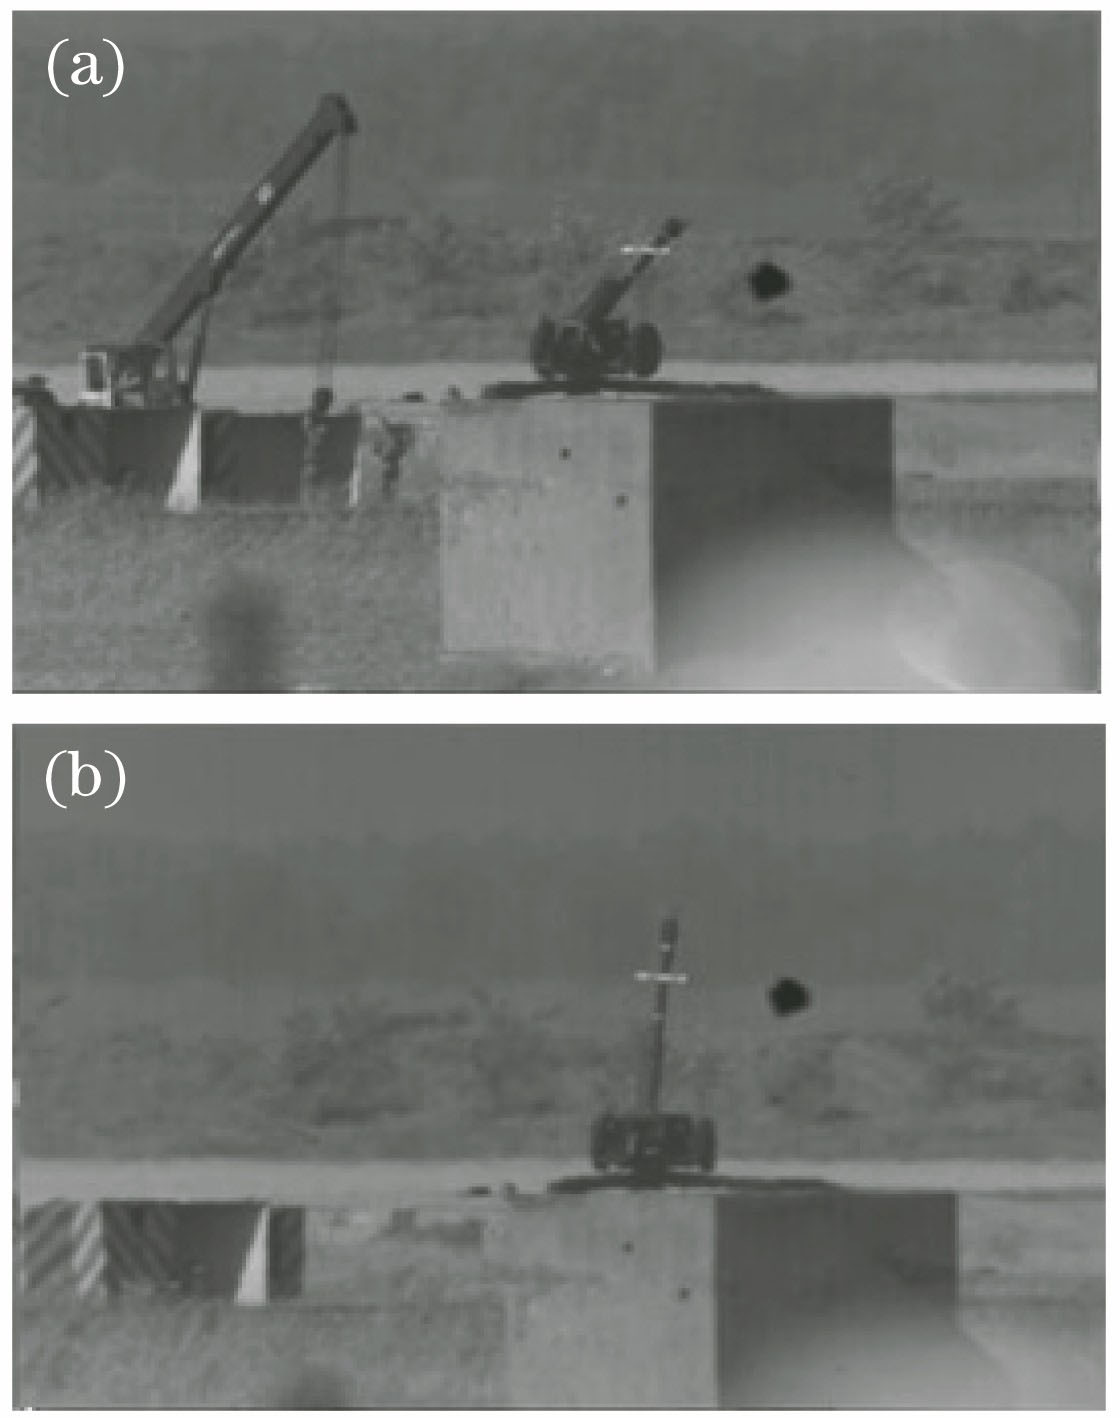 First and last processed frames in gun barrel sequence. (a) One angel setting of gun barrel; (b) another angel setting of gun barrel